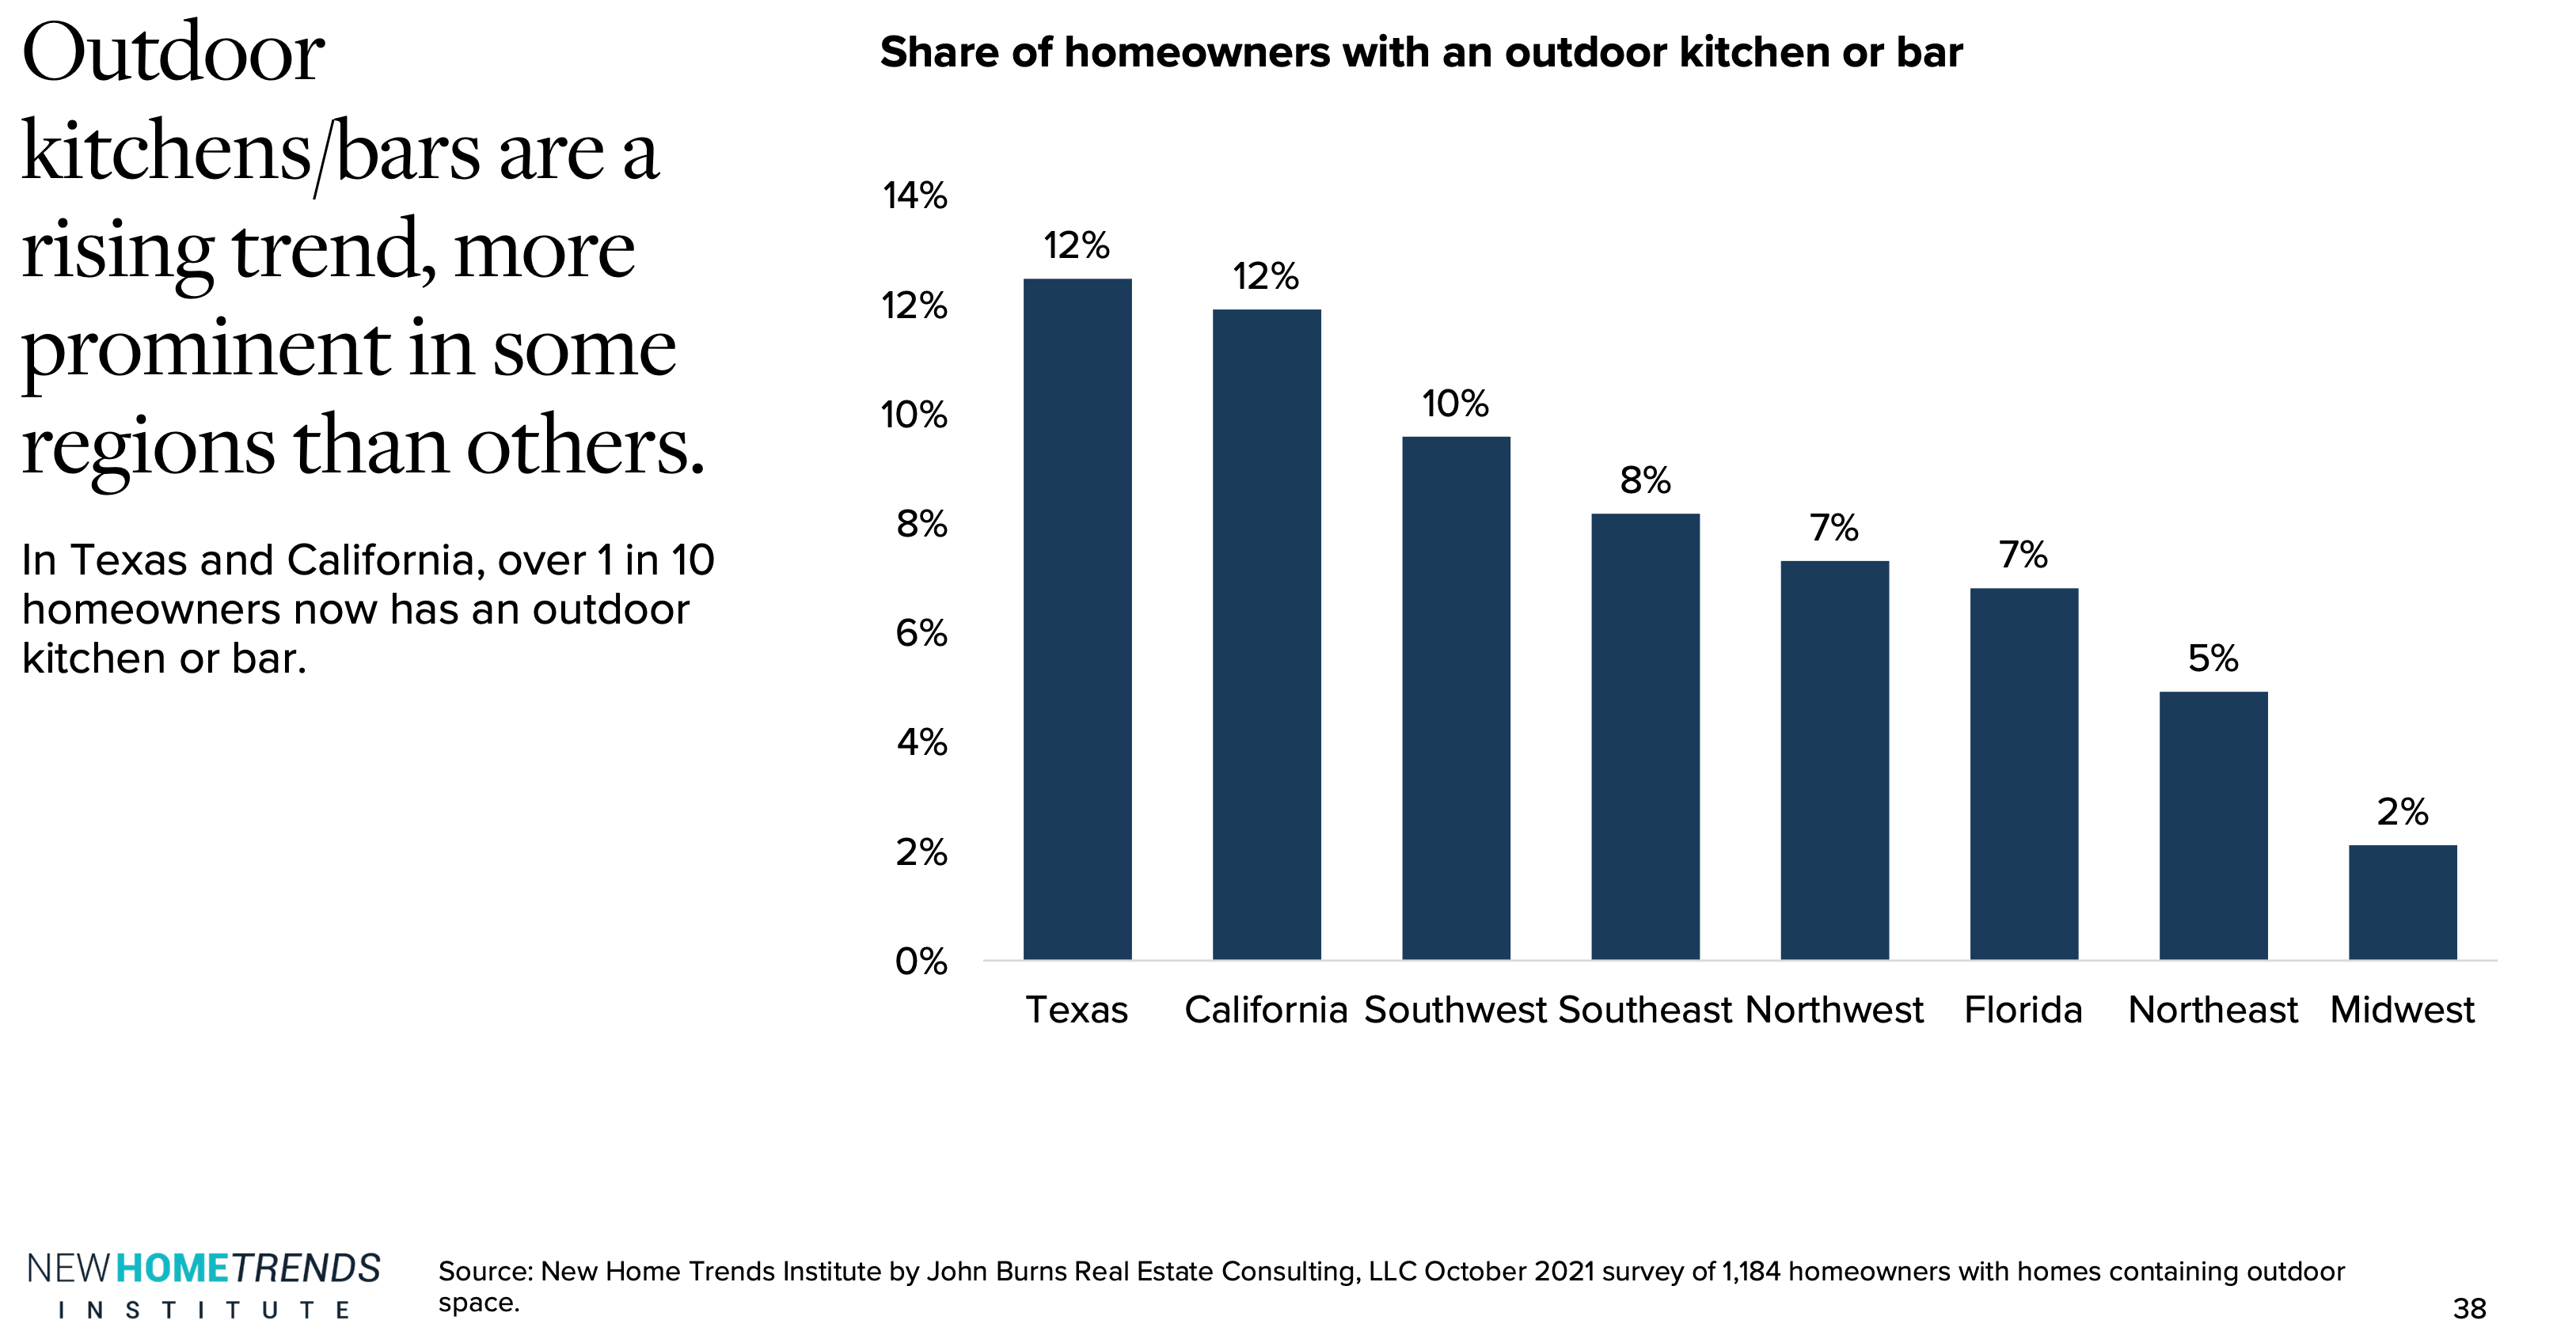 New Home Trends Institute November Survey Insights Report: outdoor kitchens/bars by region in United States